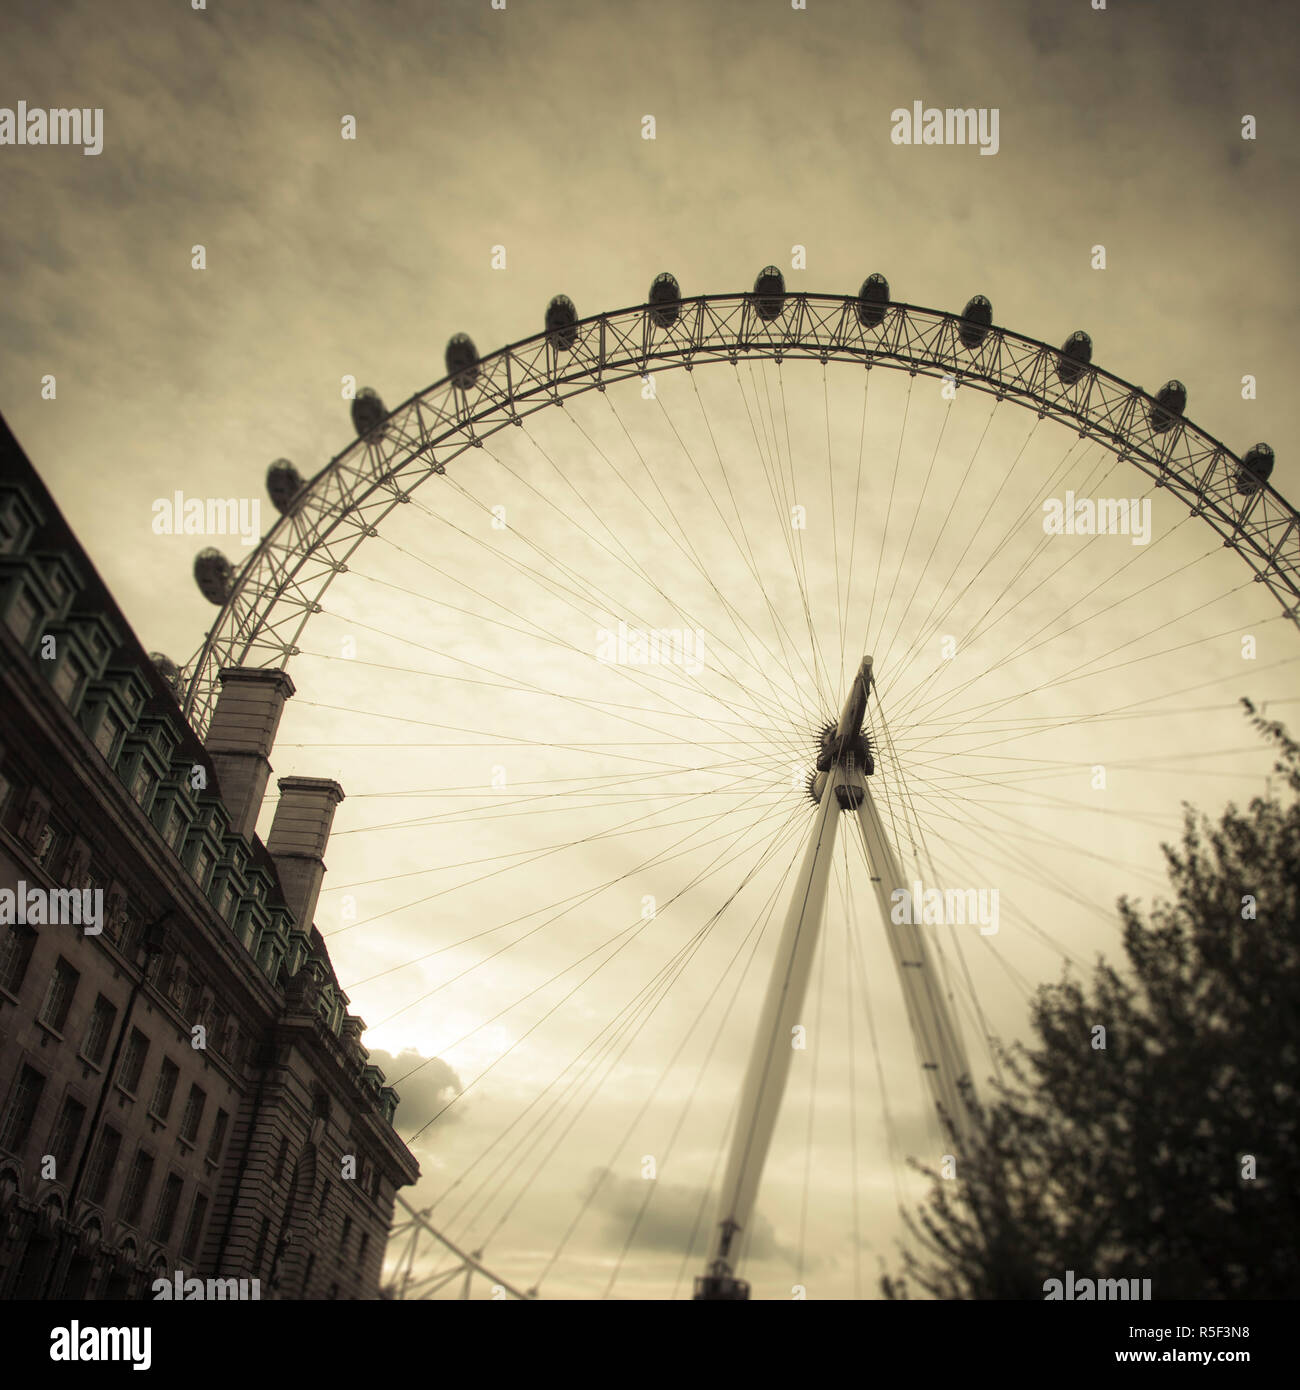 London Eye, South Bank, Londres, Angleterre, Royaume-Uni Banque D'Images